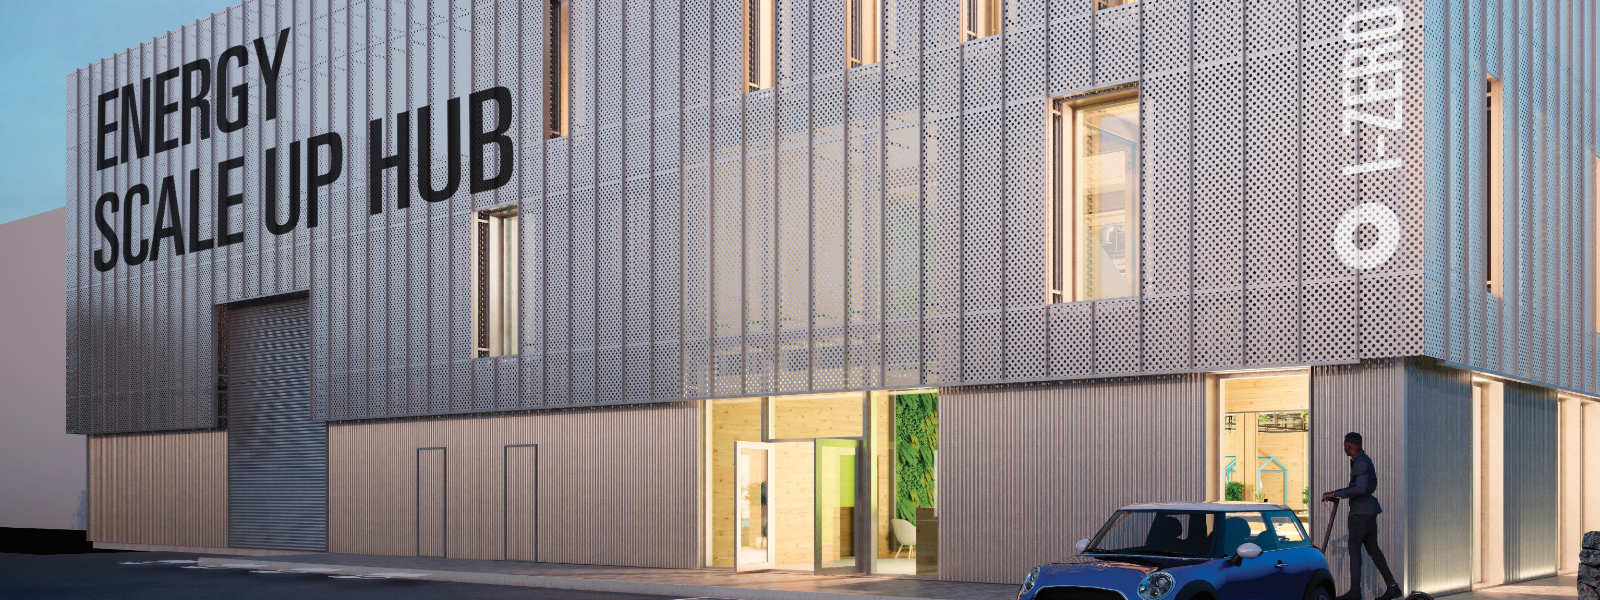 Artist's impression of the finished Energy Incubator and Scale-up Hub building featuring grey mesh cladding and large signage on top-right facade of building